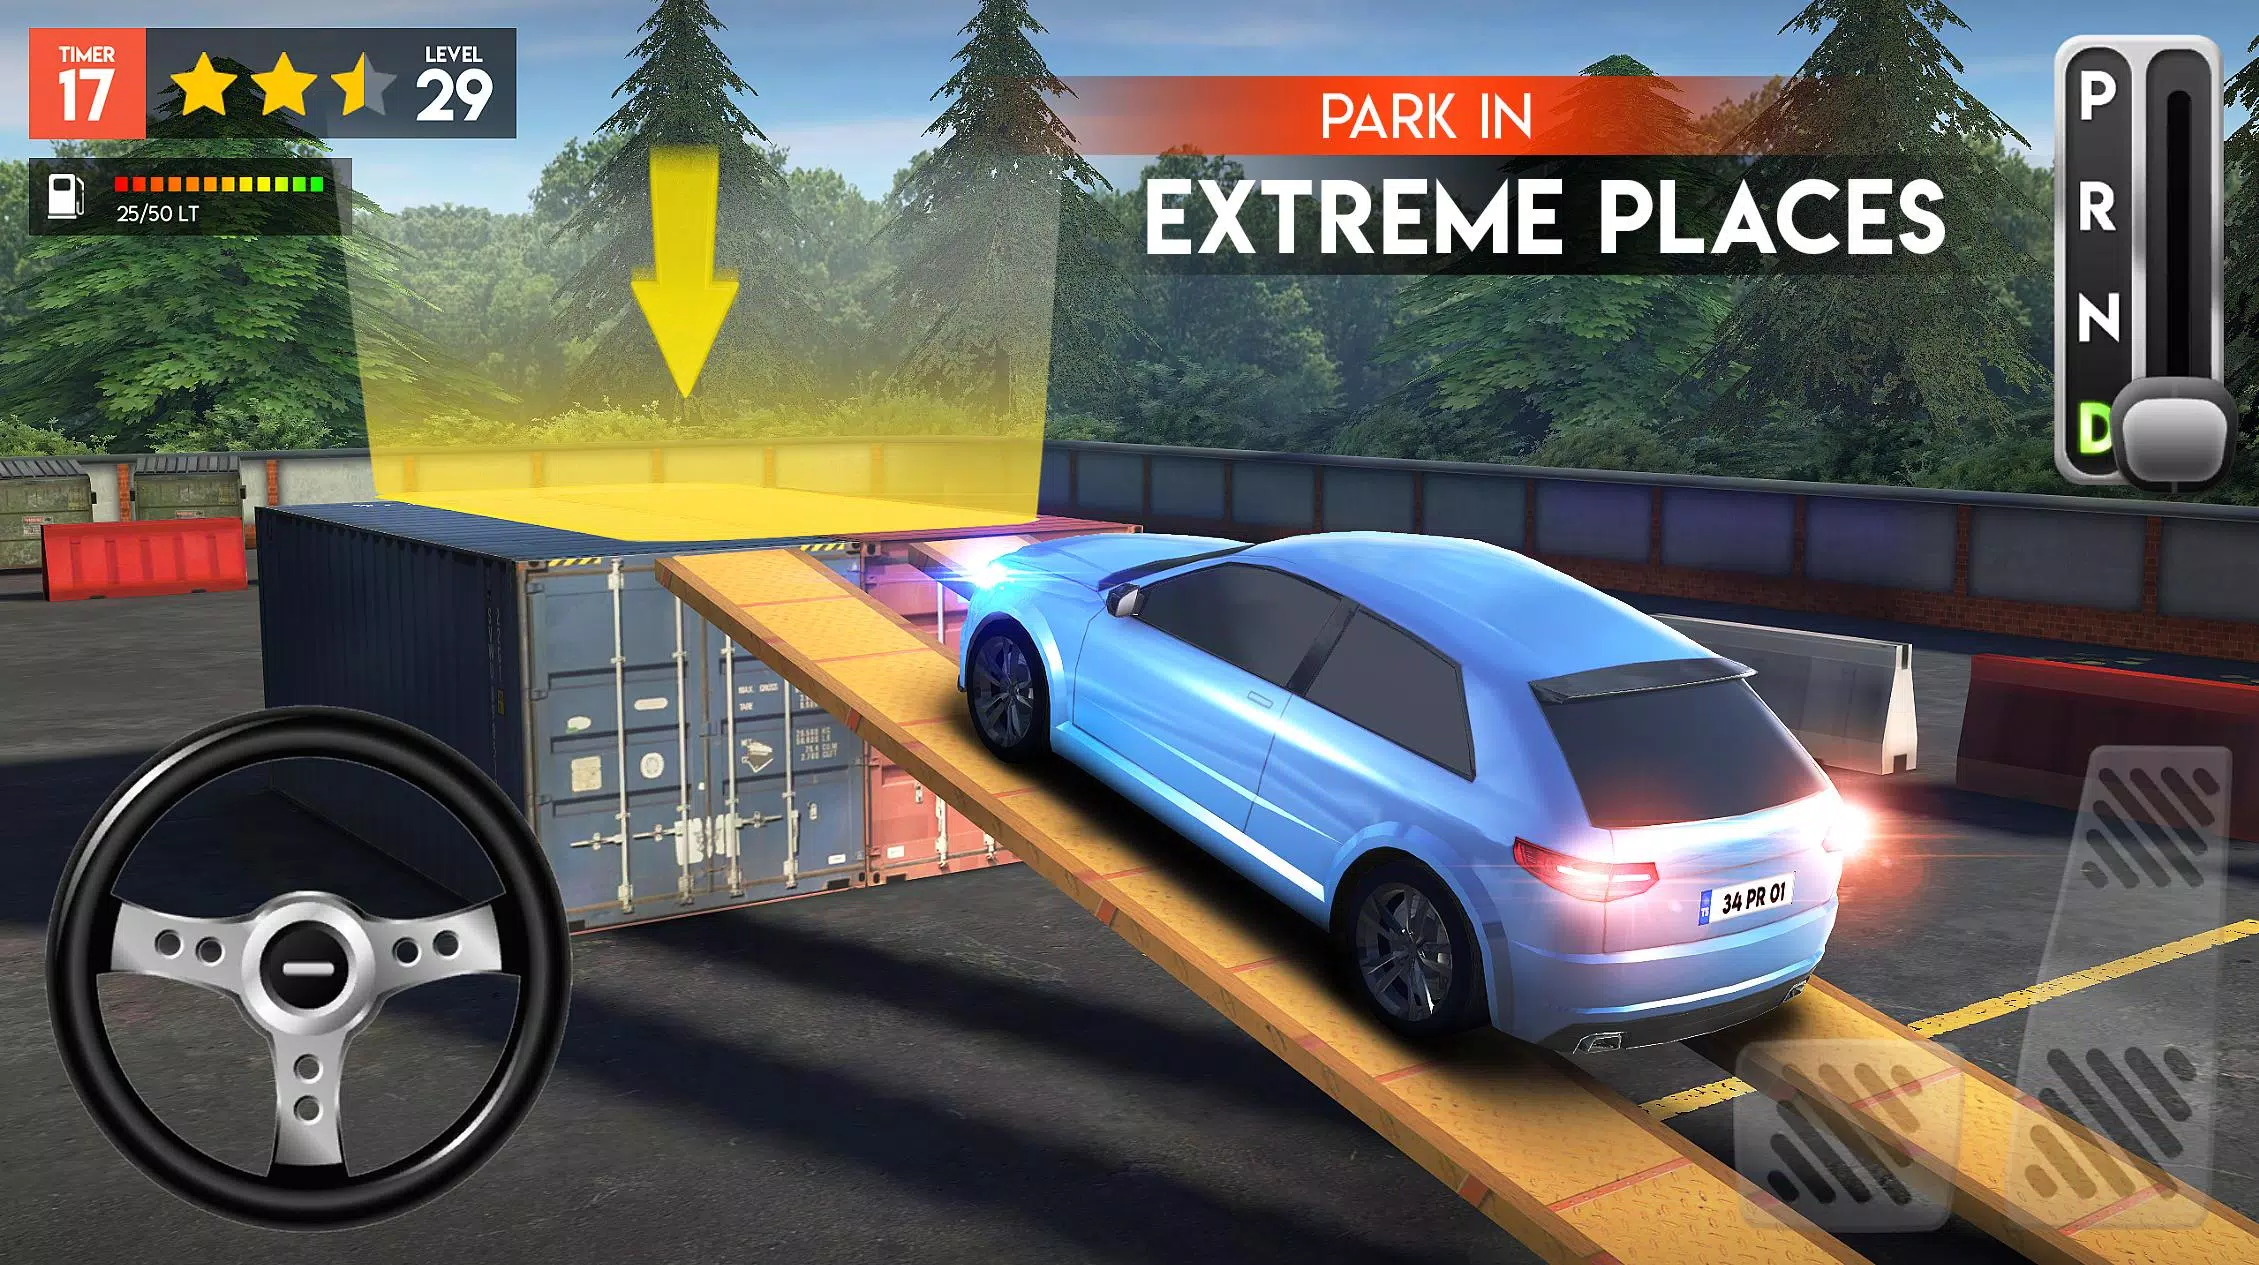 Car Parking Pro - Park & Drive APK for Android Download